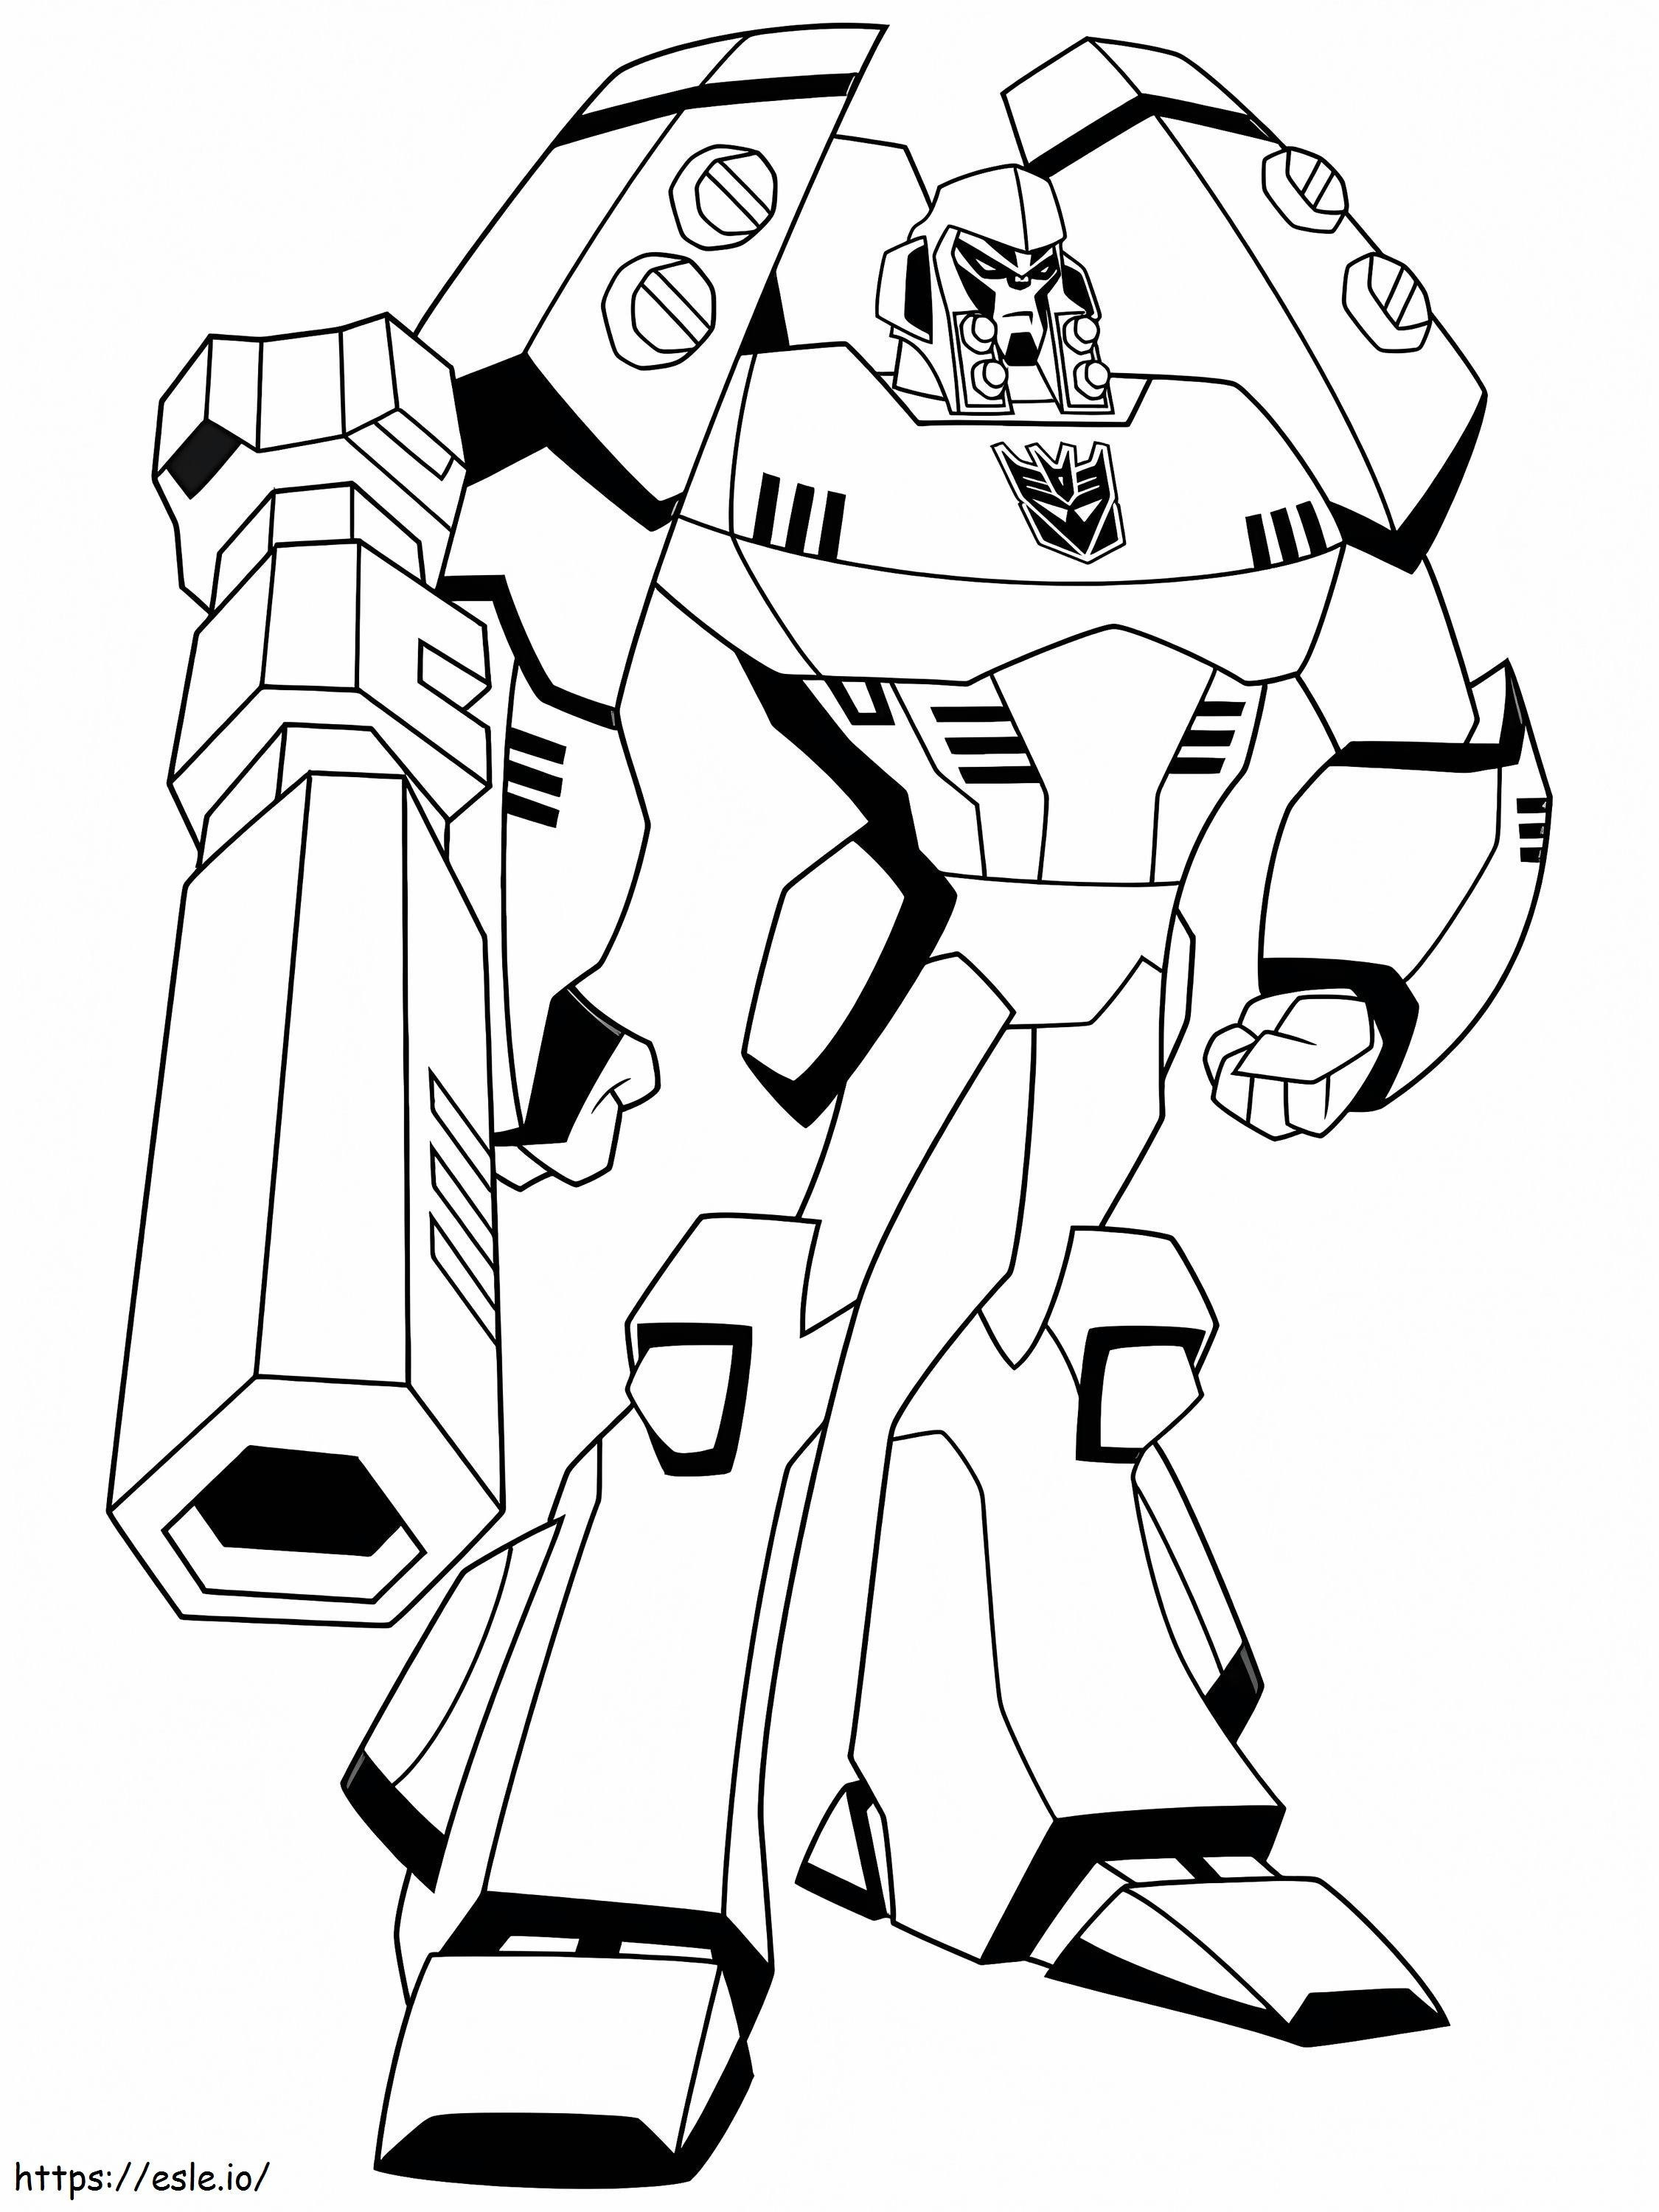 Animated Megatron coloring page